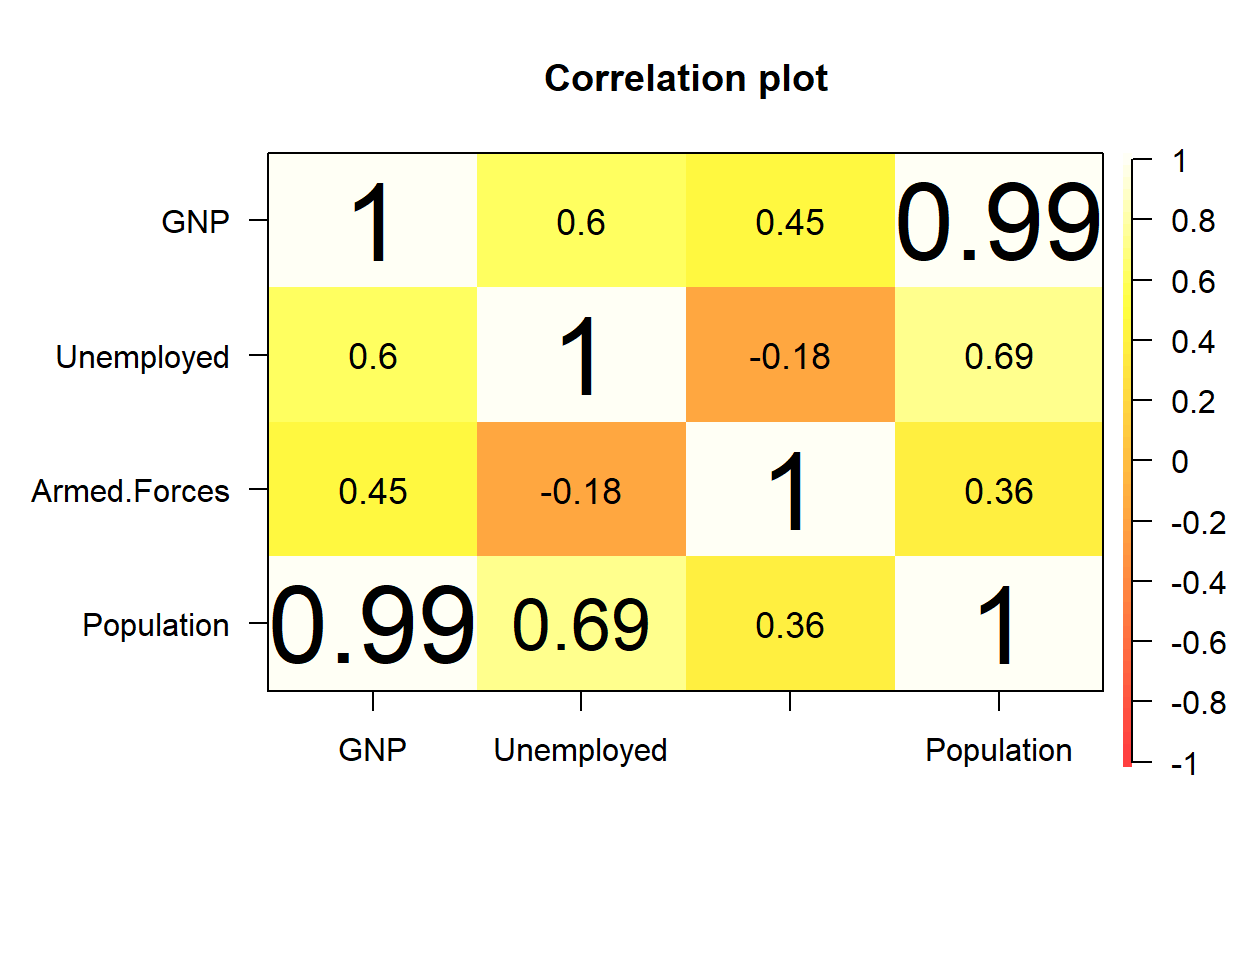 Custom color palette in corPlot from psych package